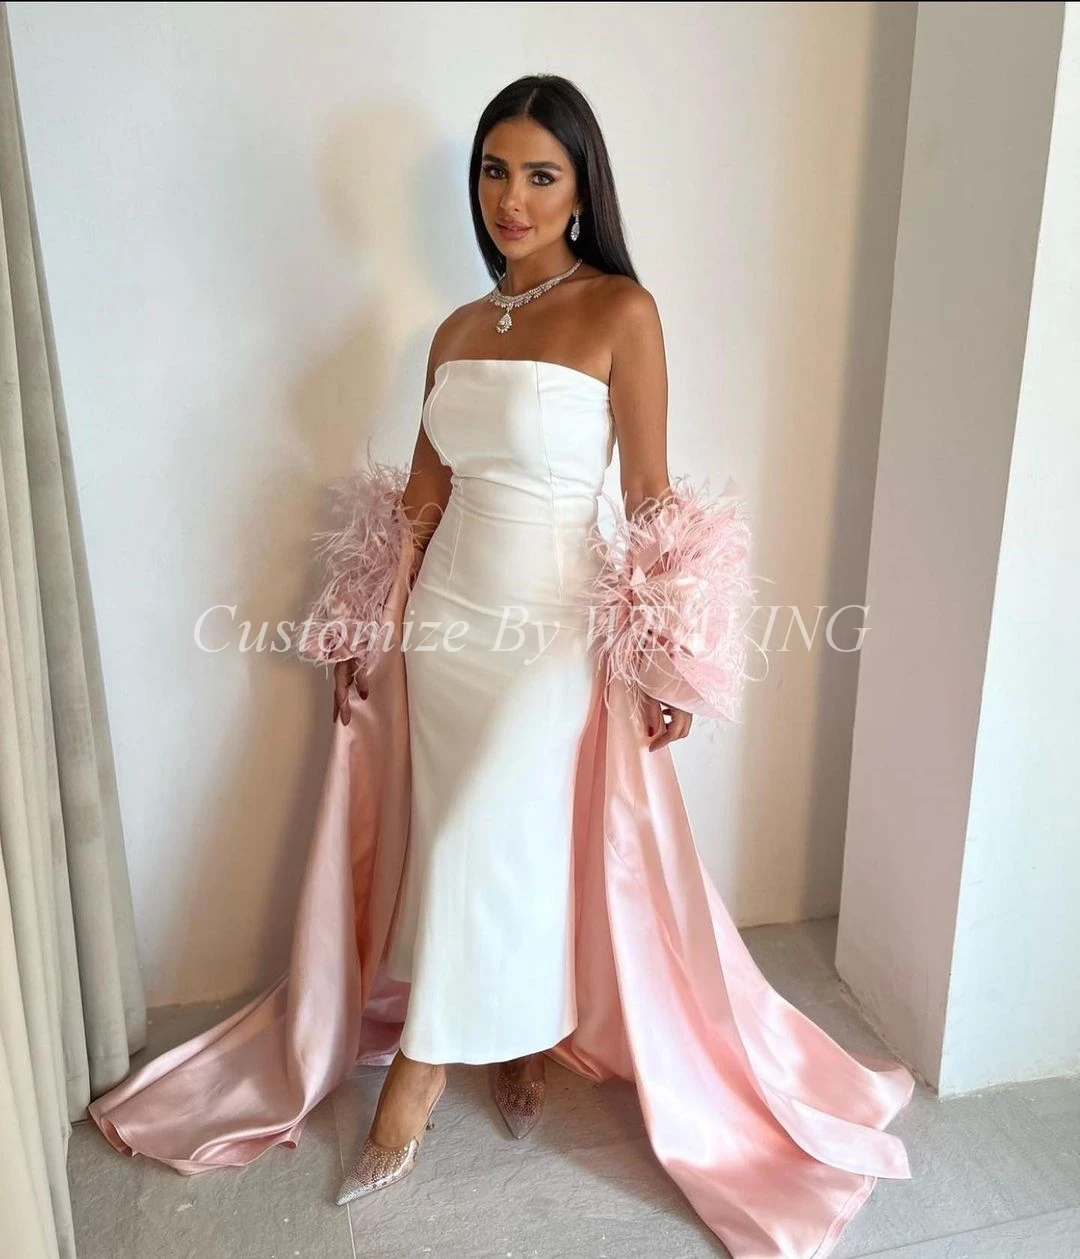 

Ivory Satin Long Prom Dresses with Pink Feathers Shawl Sheath Strapless Ankle Length Saudi Arabia Women Evening Party Dress